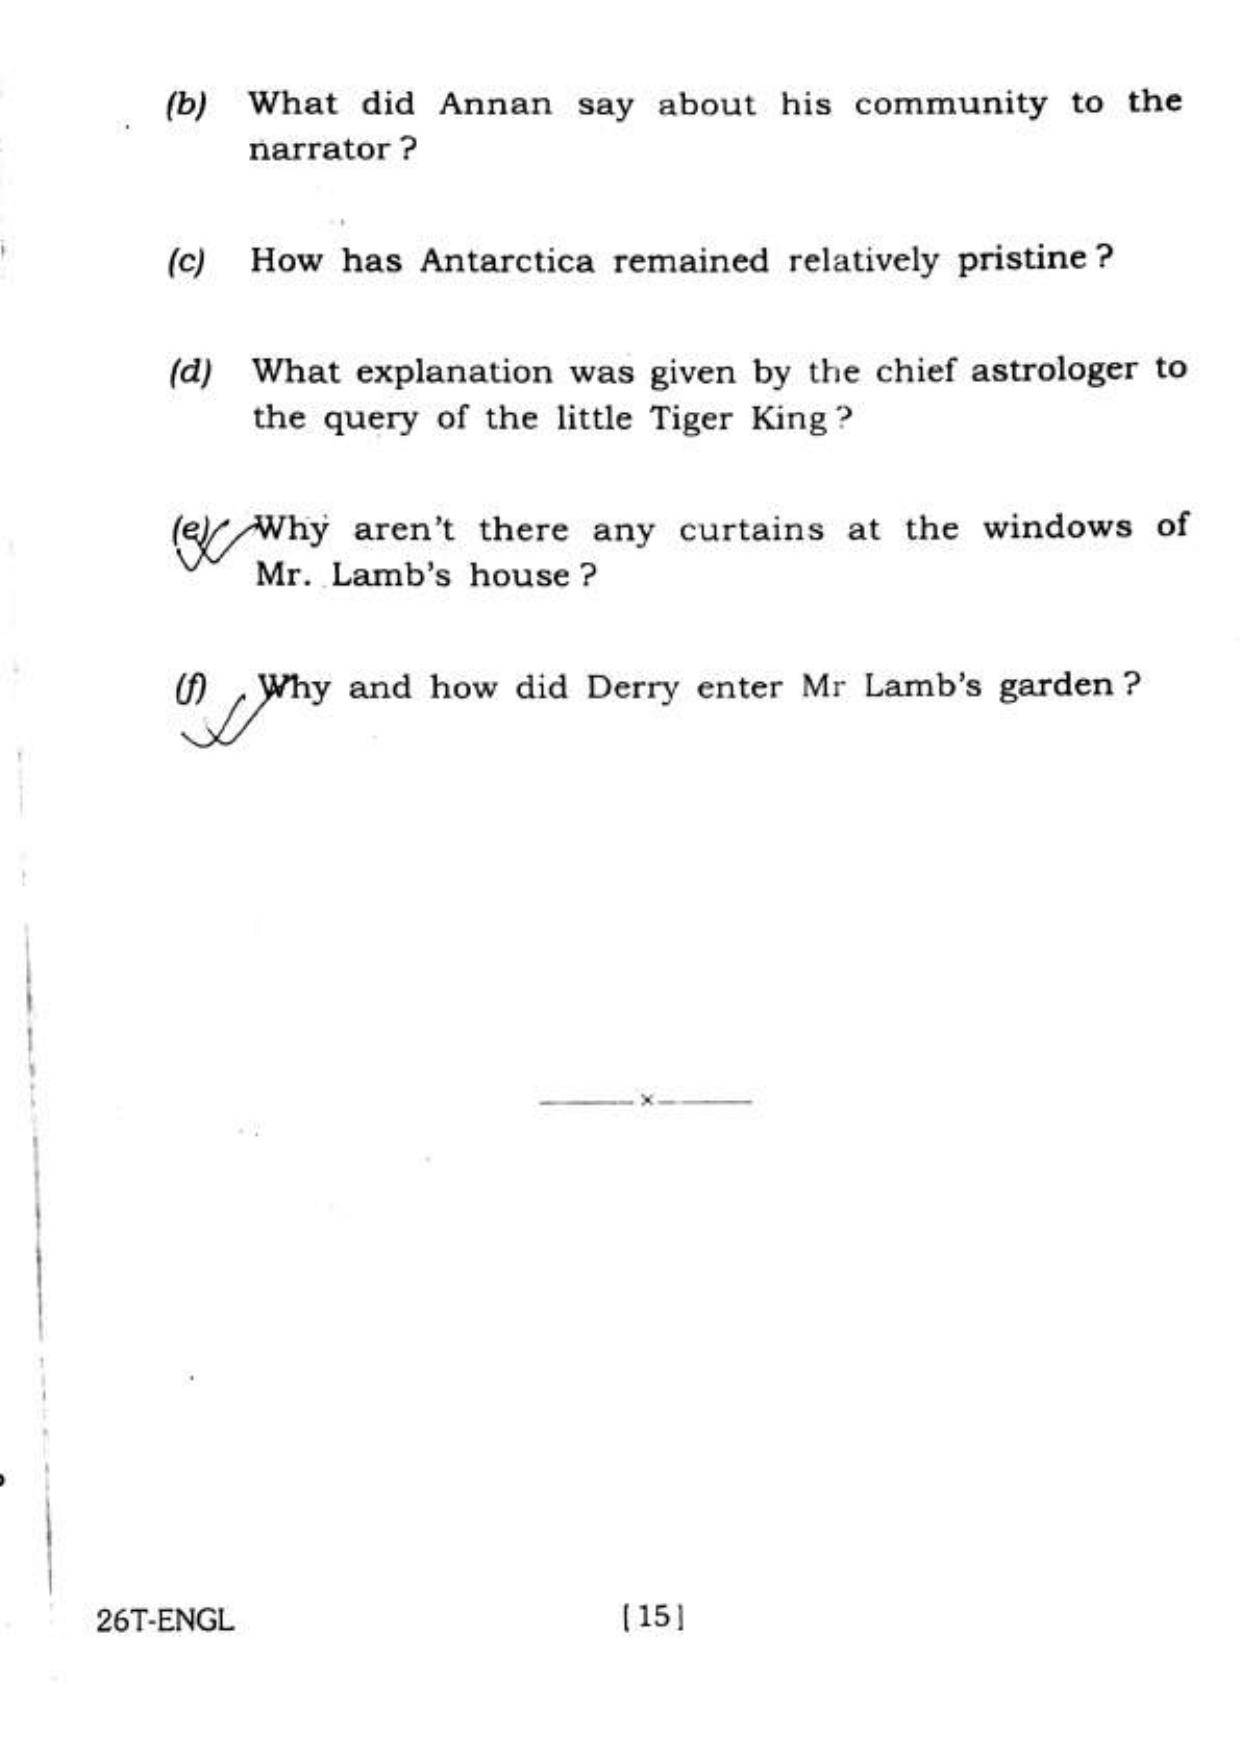 Assam HS 2nd Year English 2016 Question Paper - Page 15